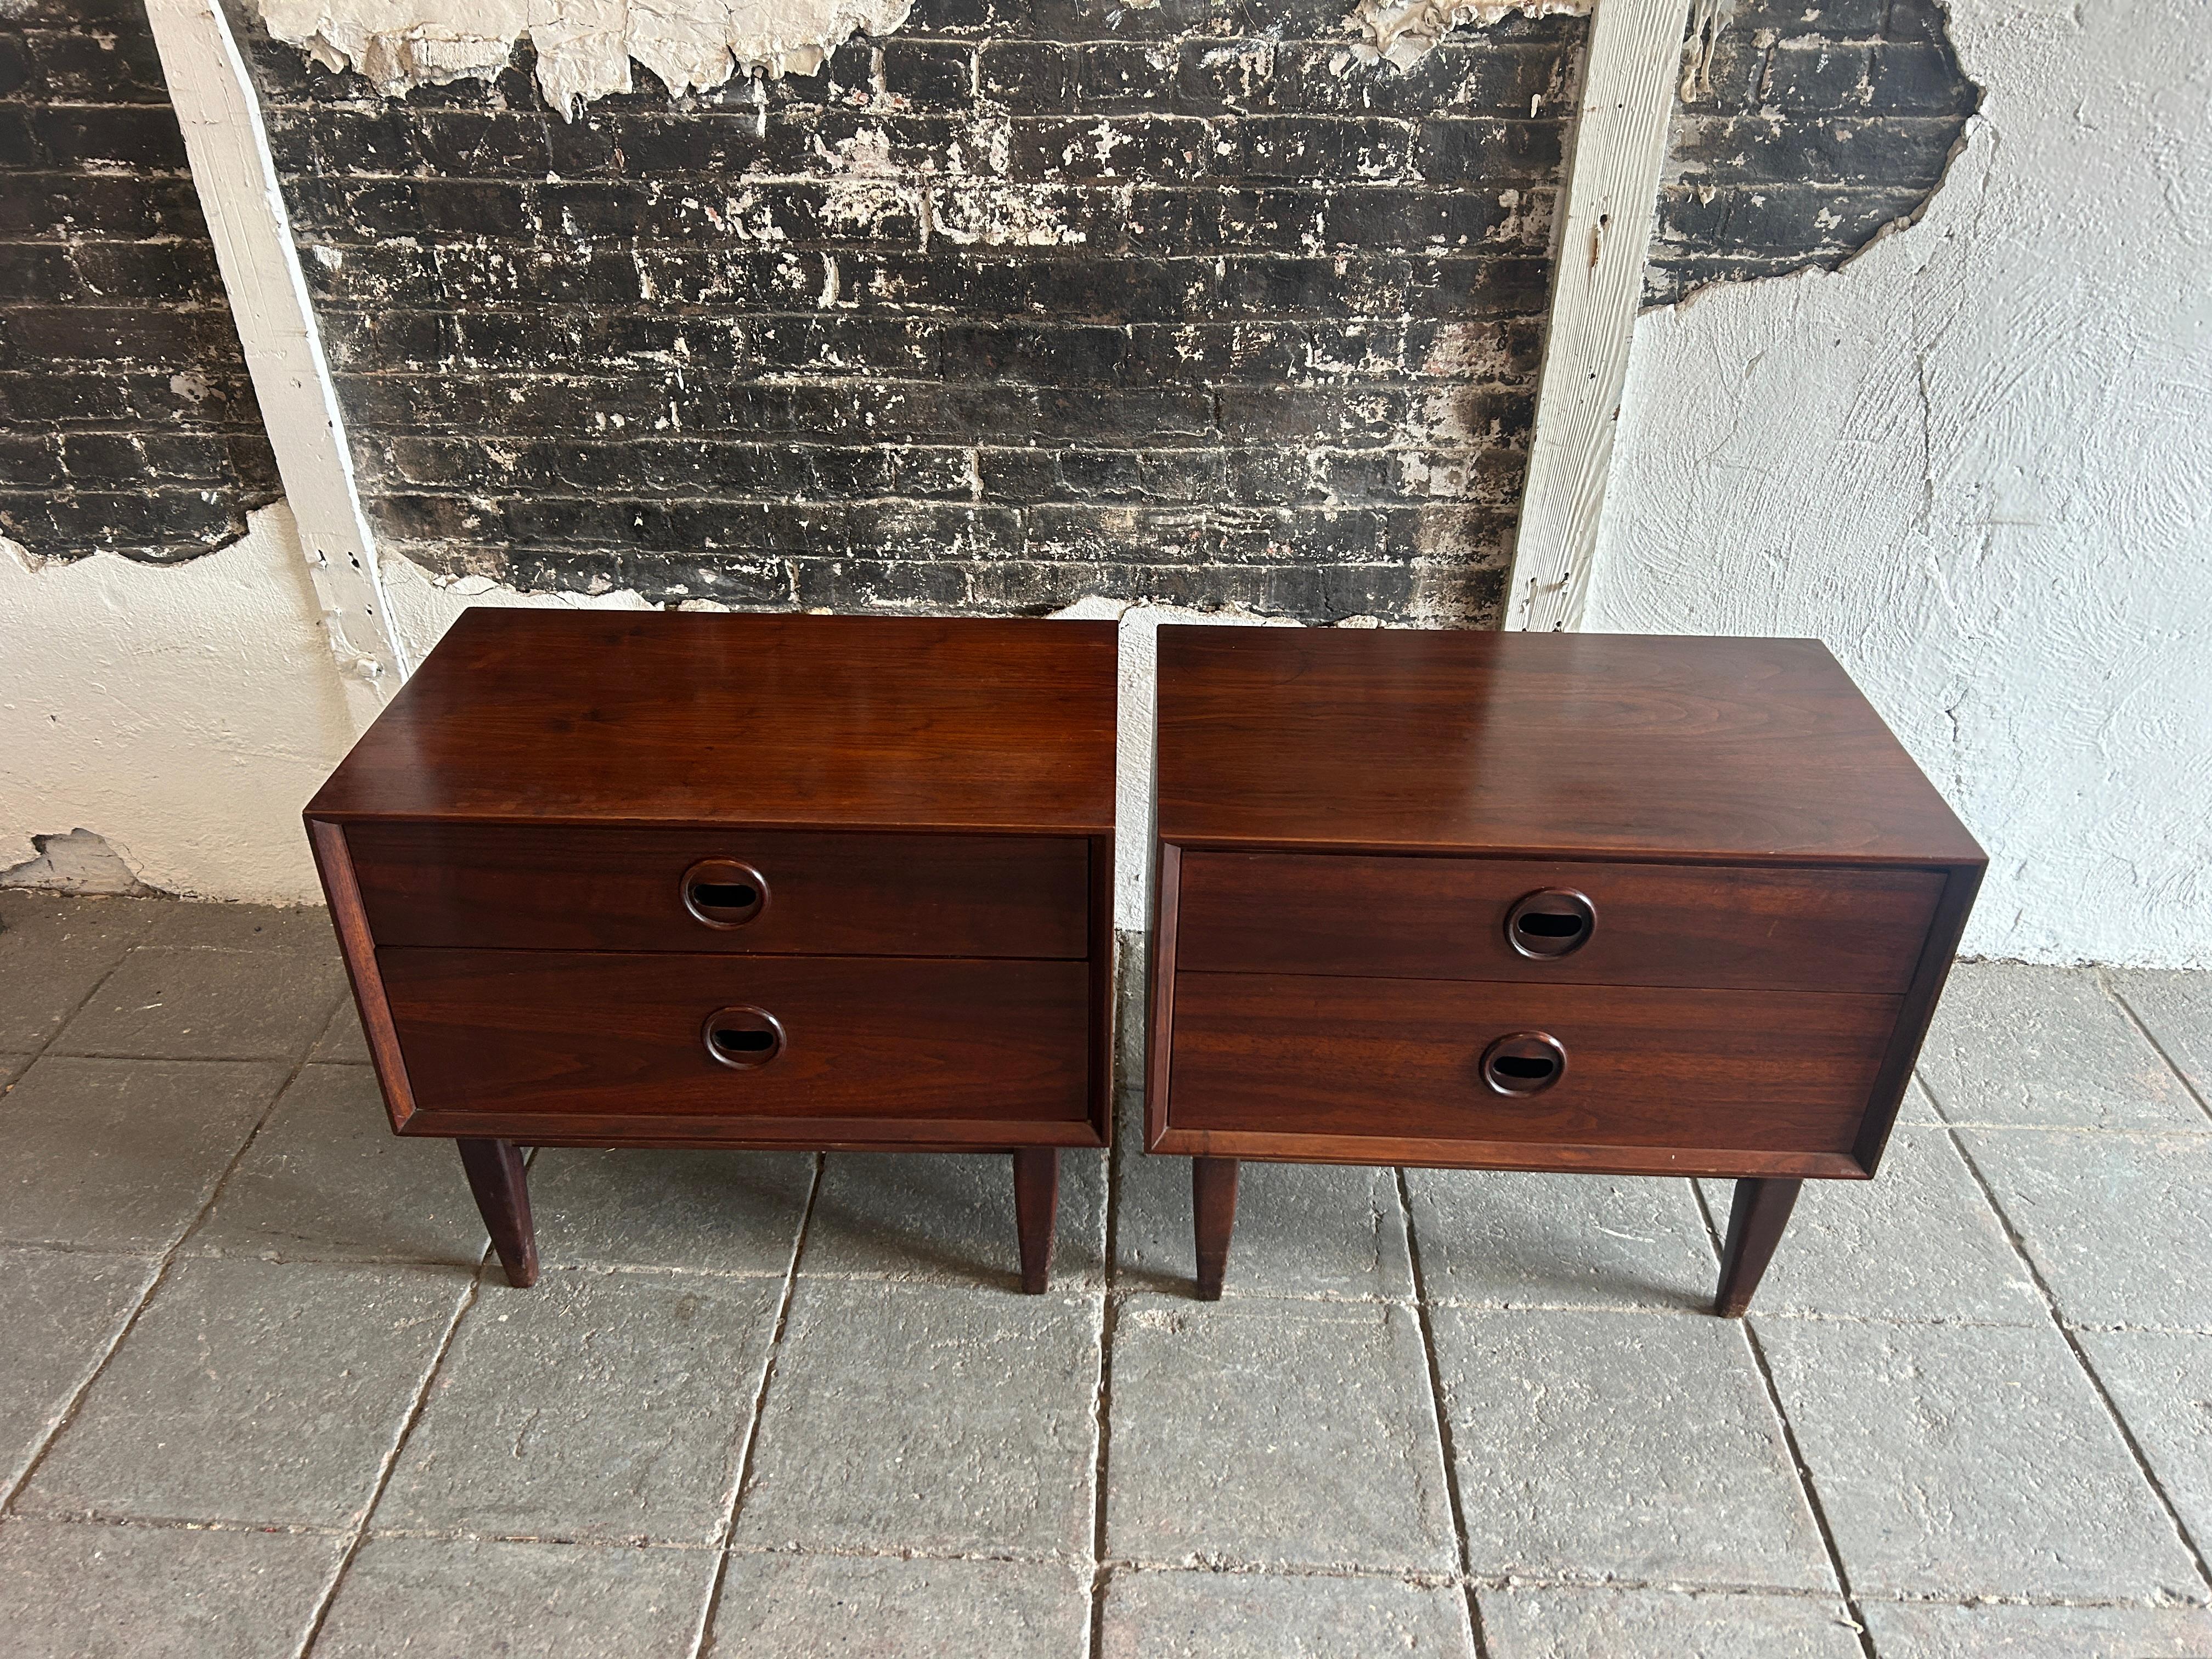 Pair of unique mid century modern walnut nightstands with carved handles. Dark reddish walnut wood Danish rosewood style with circular eye carved handle / Pulls. Dovetail solid oak drawer construction. Made in USA circa 1960. Located in Brooklyn